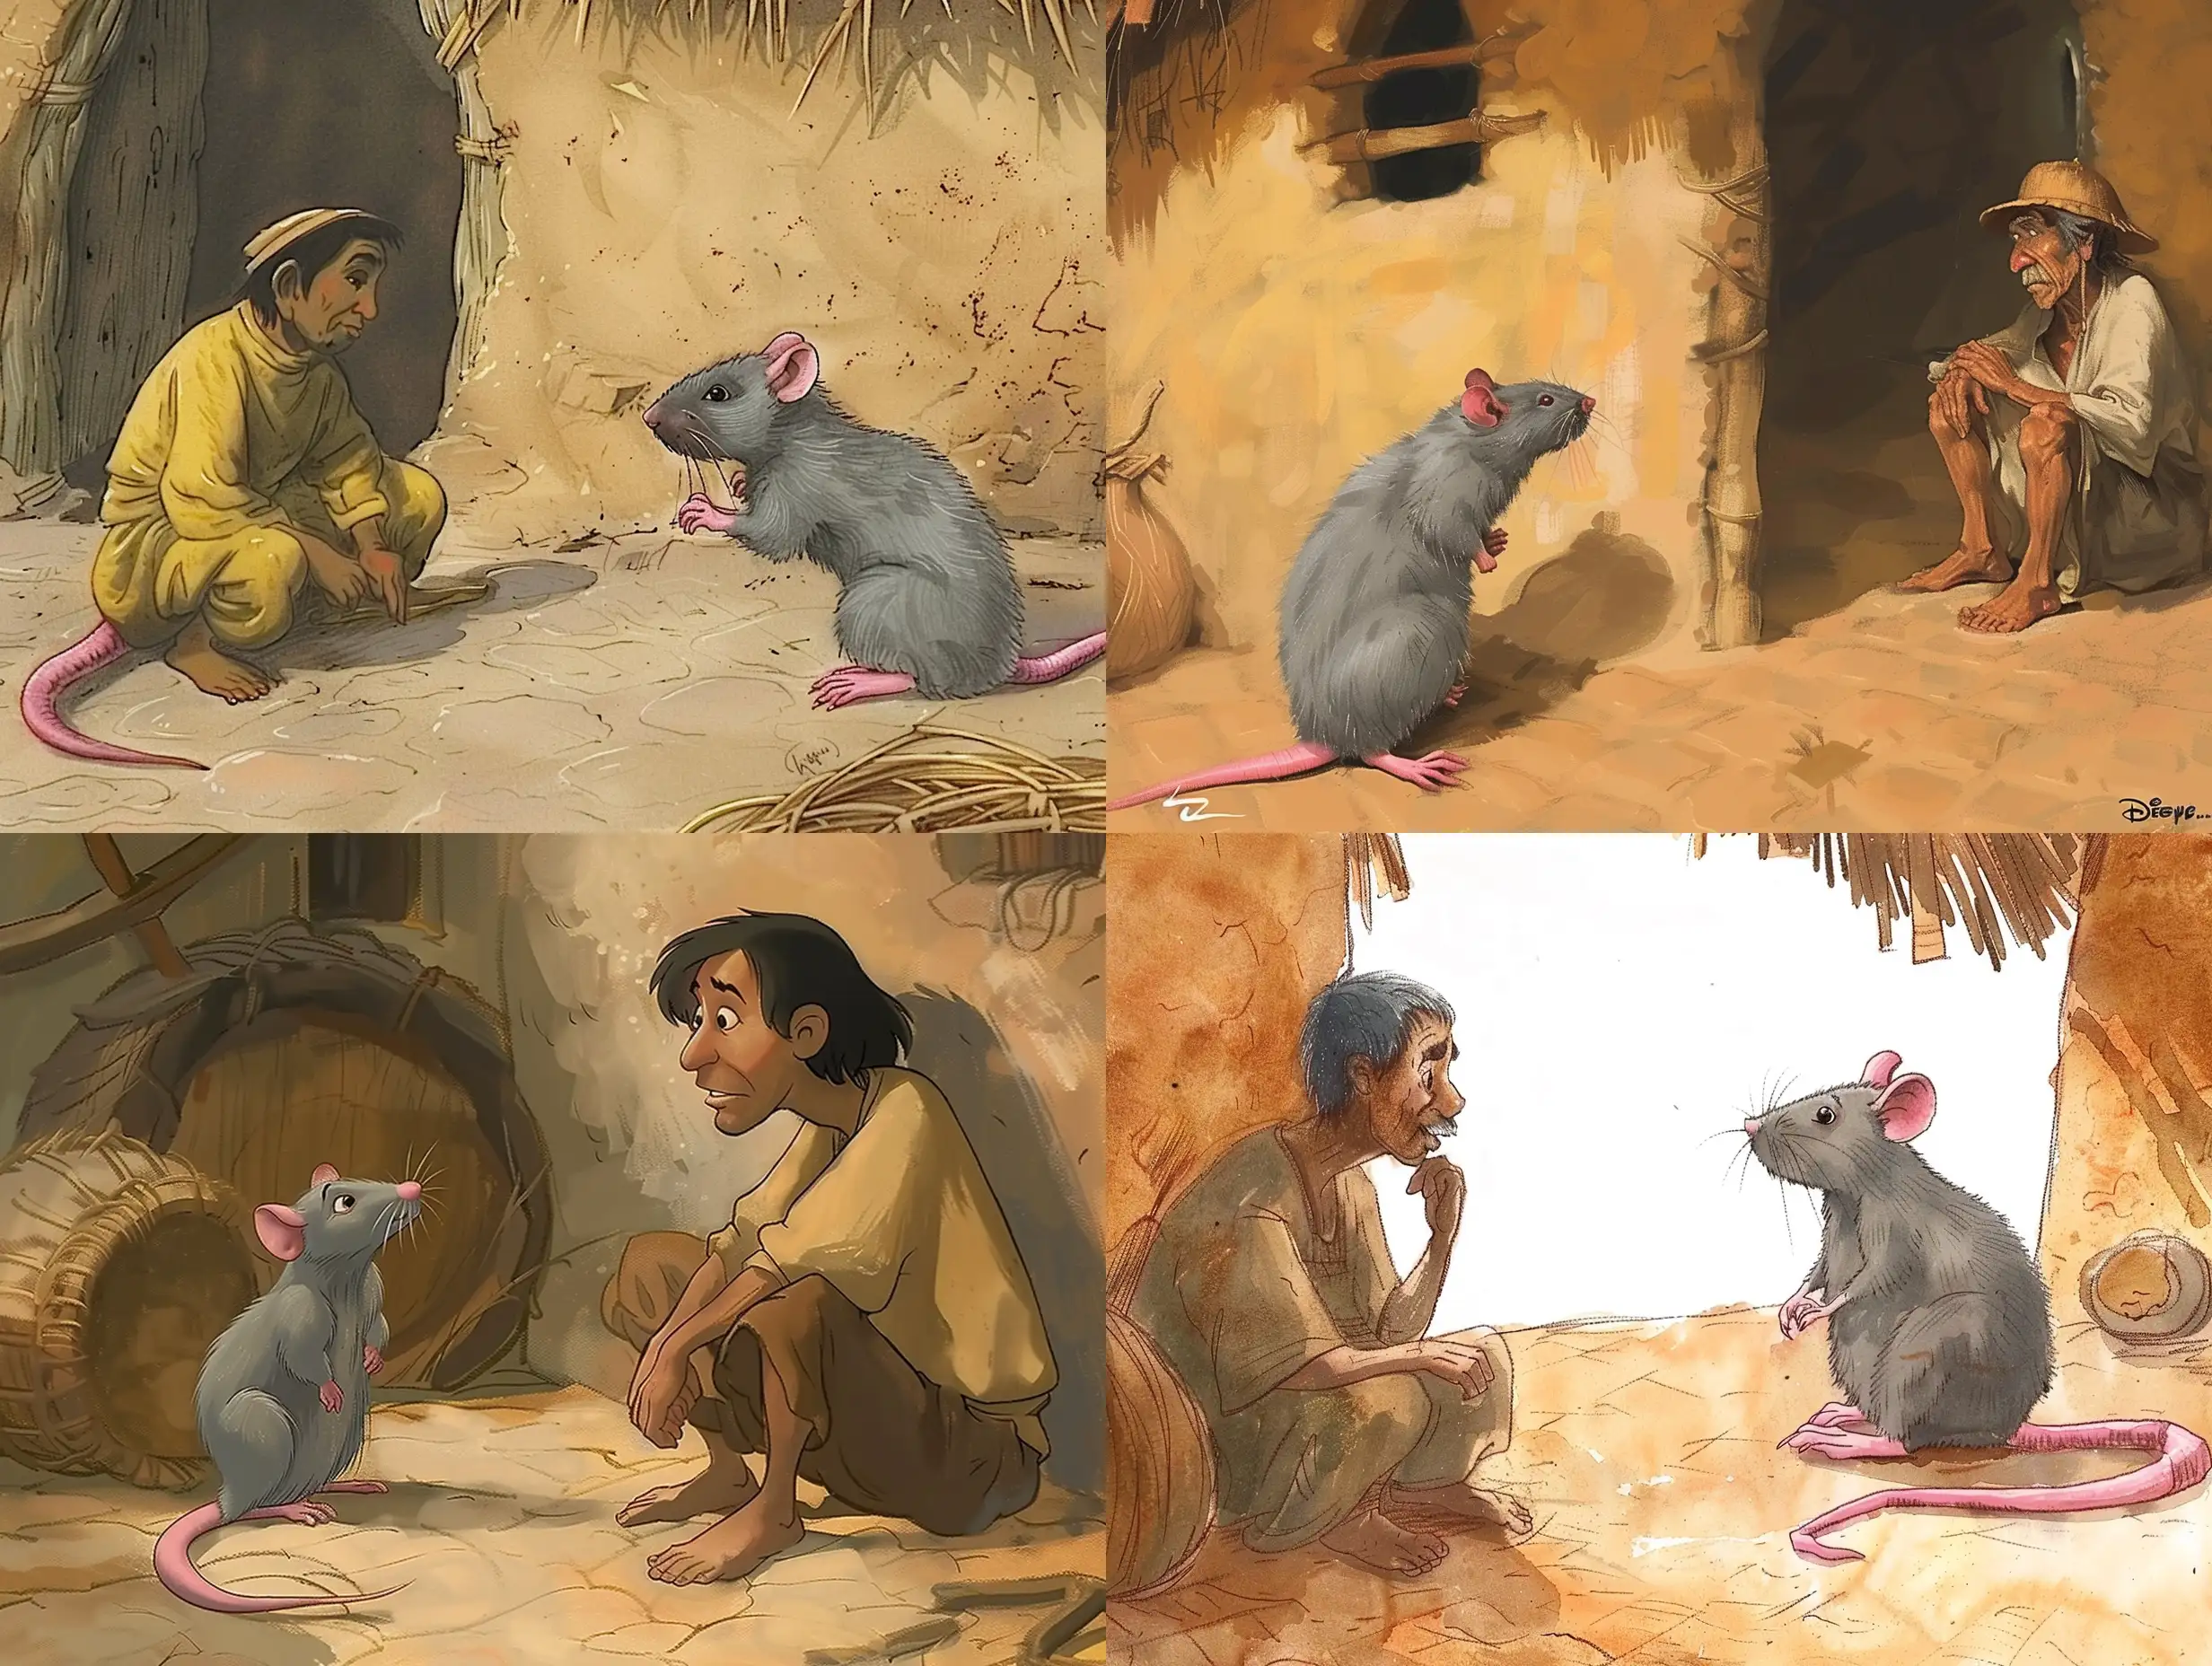 Illustration like a Disney fairytale about the peasant who met the gray rat with pink  tail in his Indonesian house, the rat is sly and sits on the clay floor and looks at the peasant